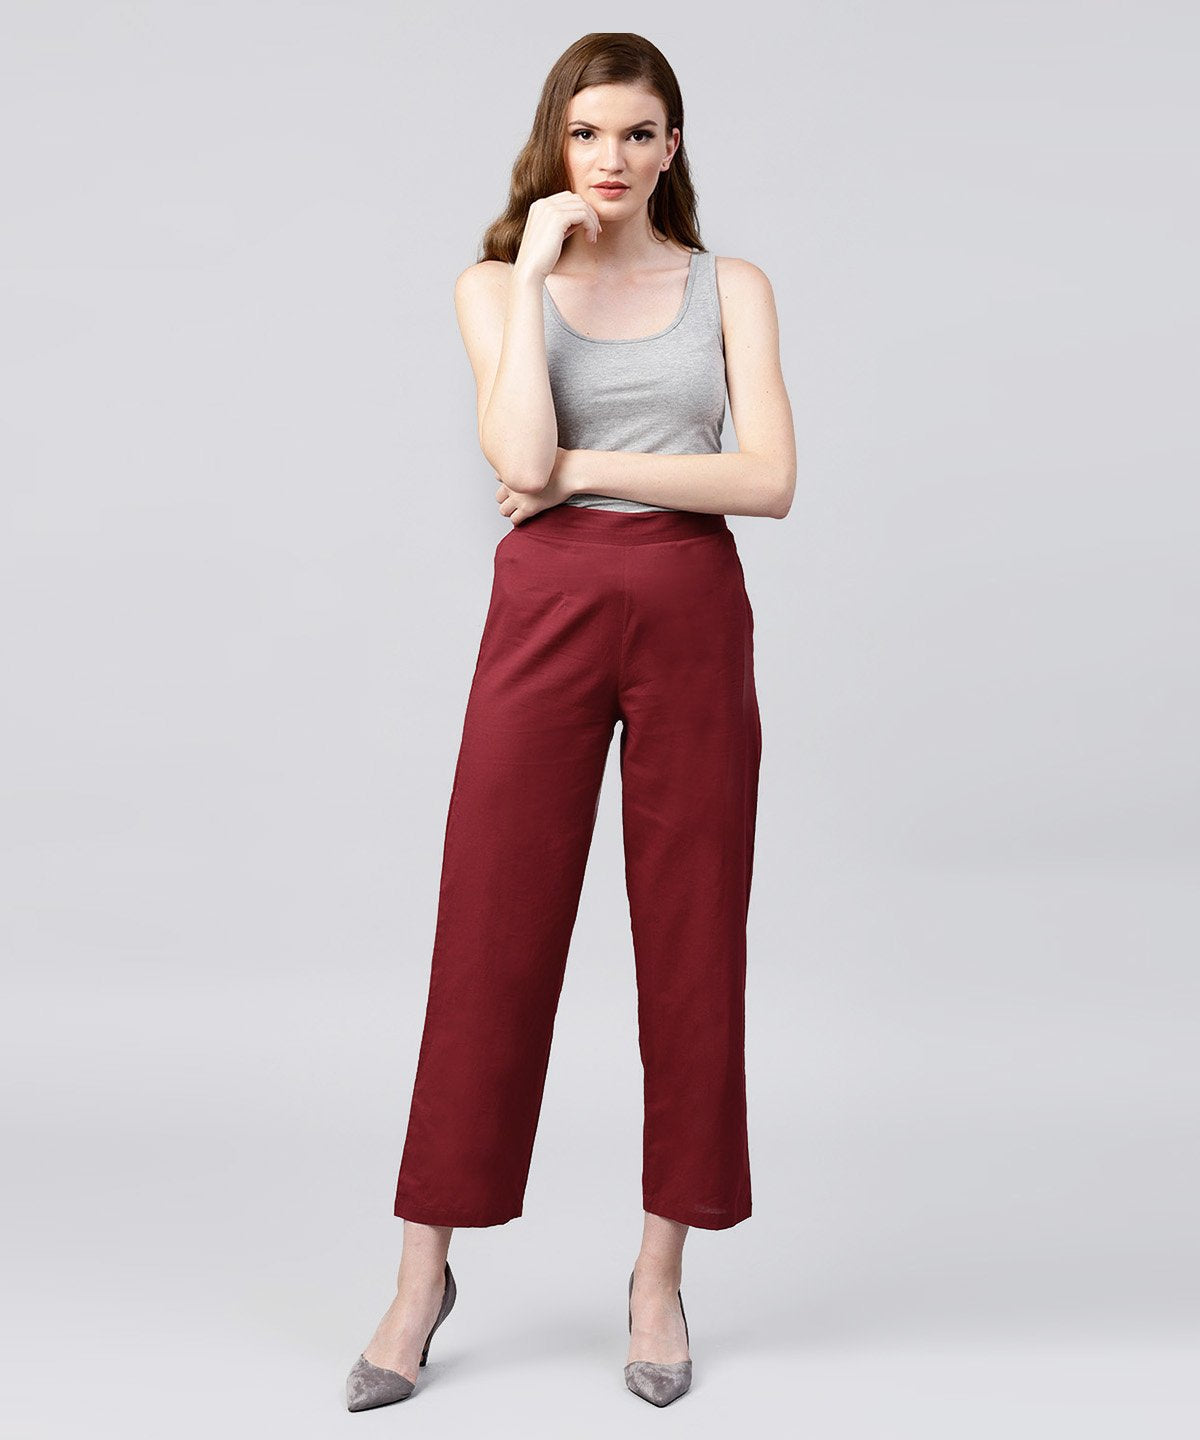 Women's Solid Maroon Ankle Length Cotton Regular Fit Trouser - Nayo Clothing